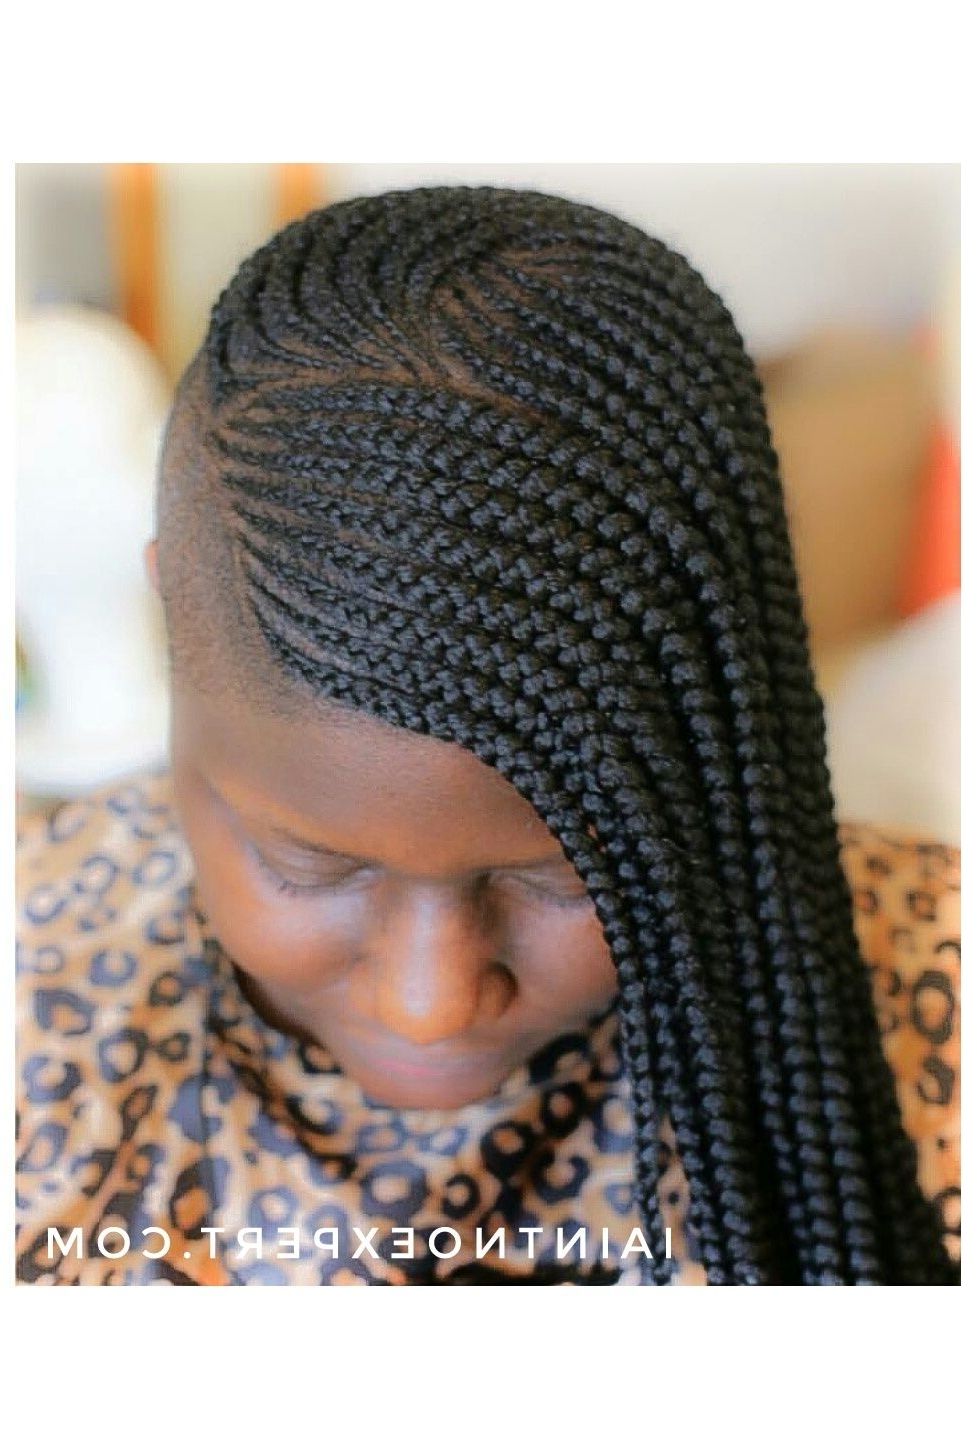 Current One Side Shaved Braided Hairstyles With Natural Hair, Shaved Sides, Protective Styles, Braids, Feeder Braids (View 7 of 15)